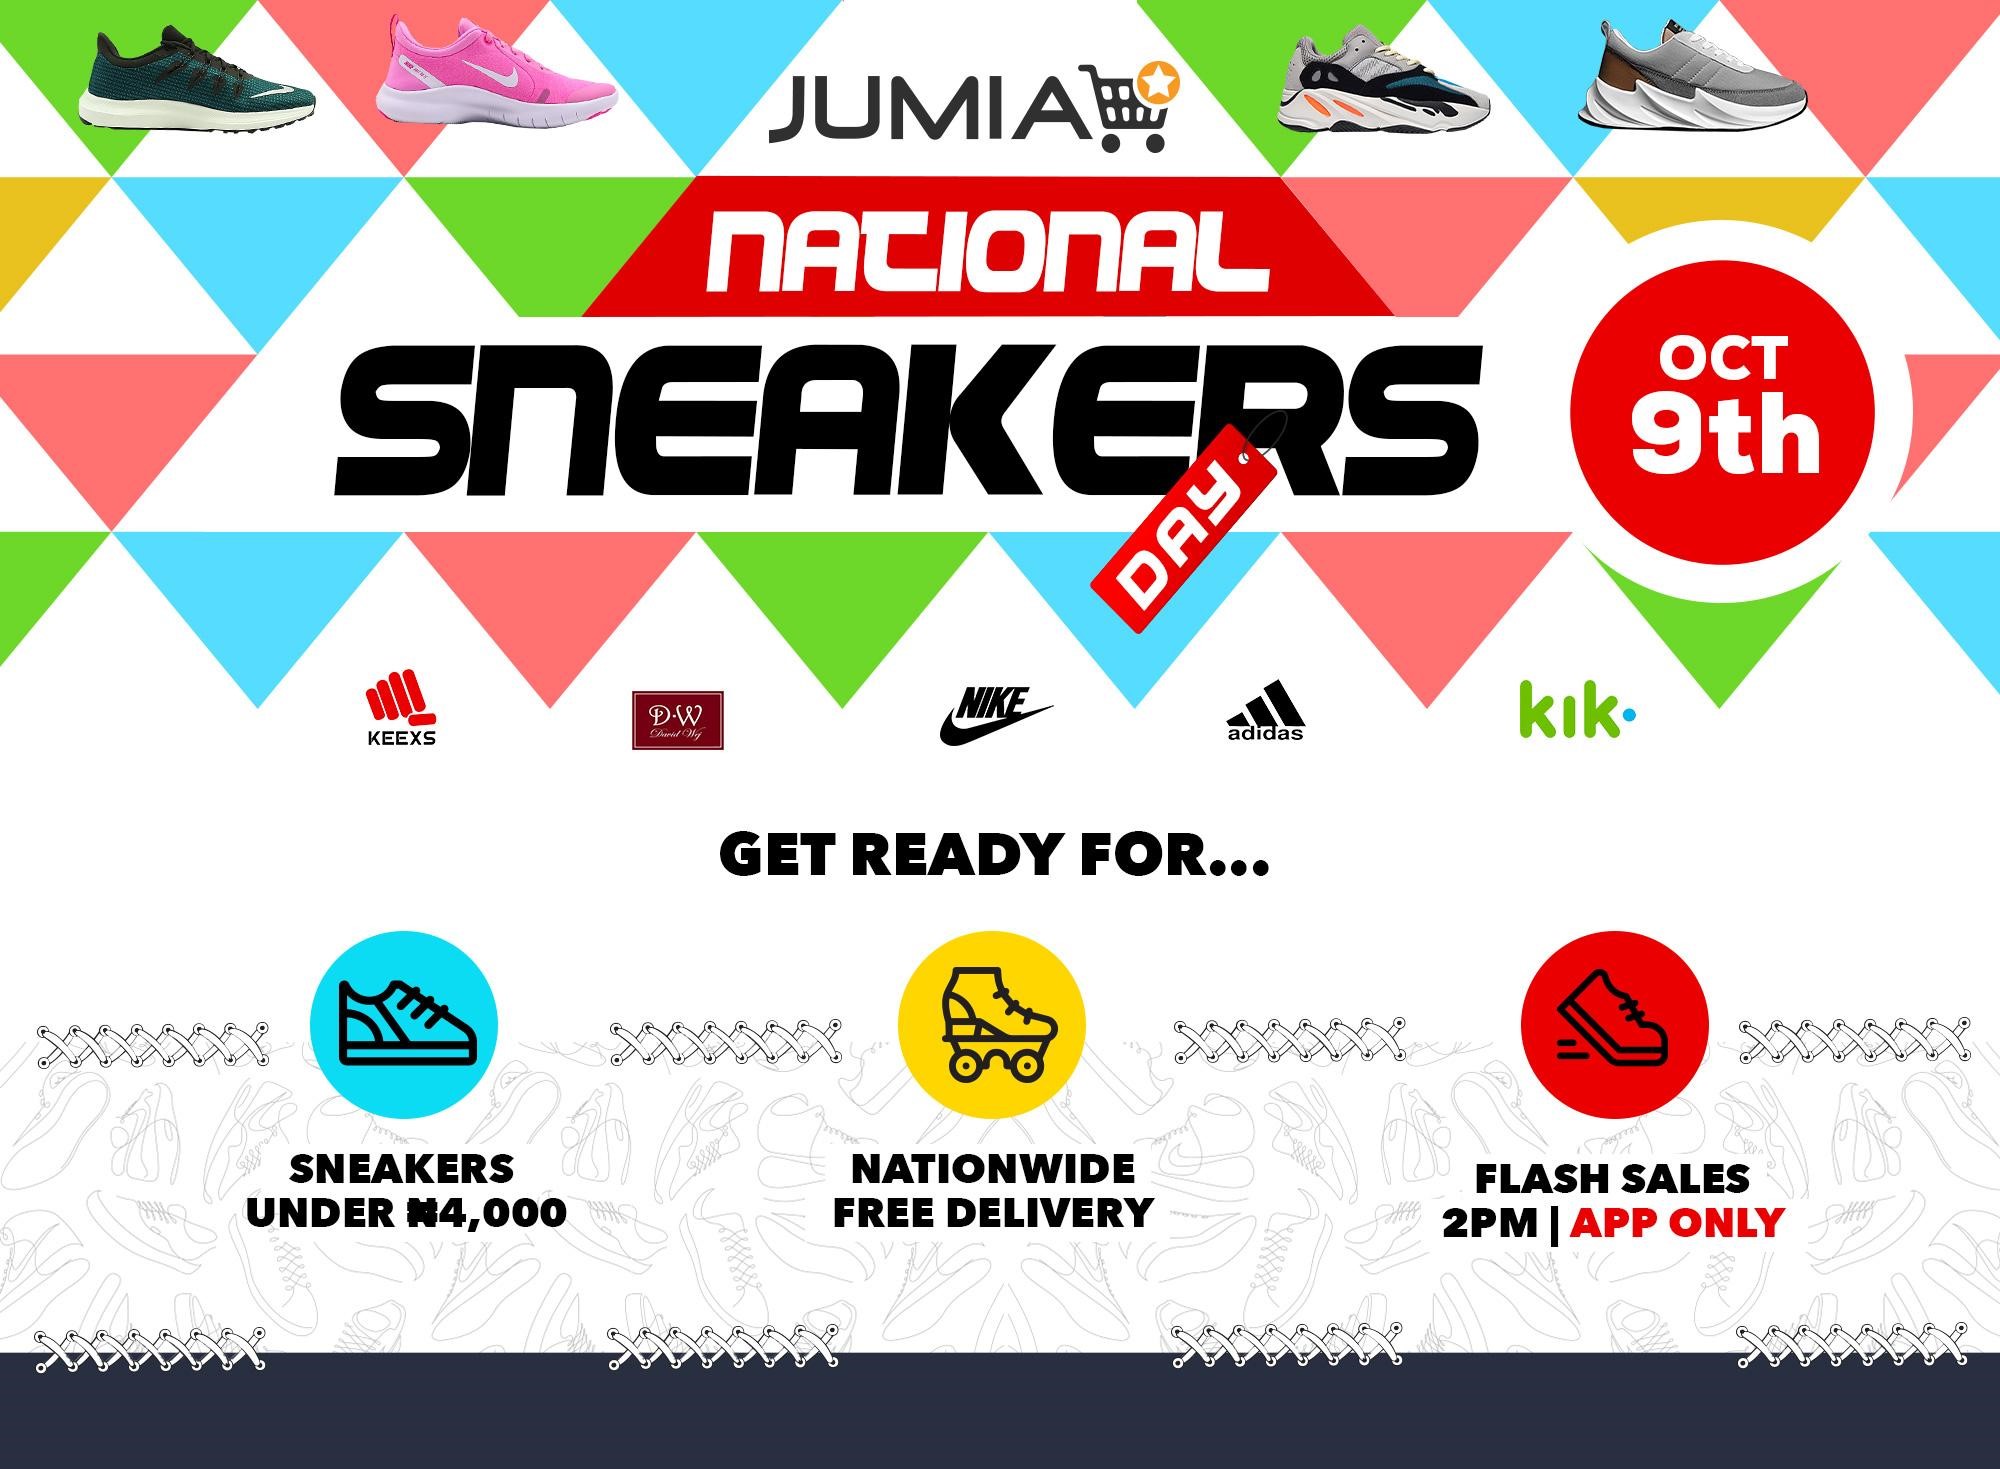 Jumia will be offering Free Delivery 